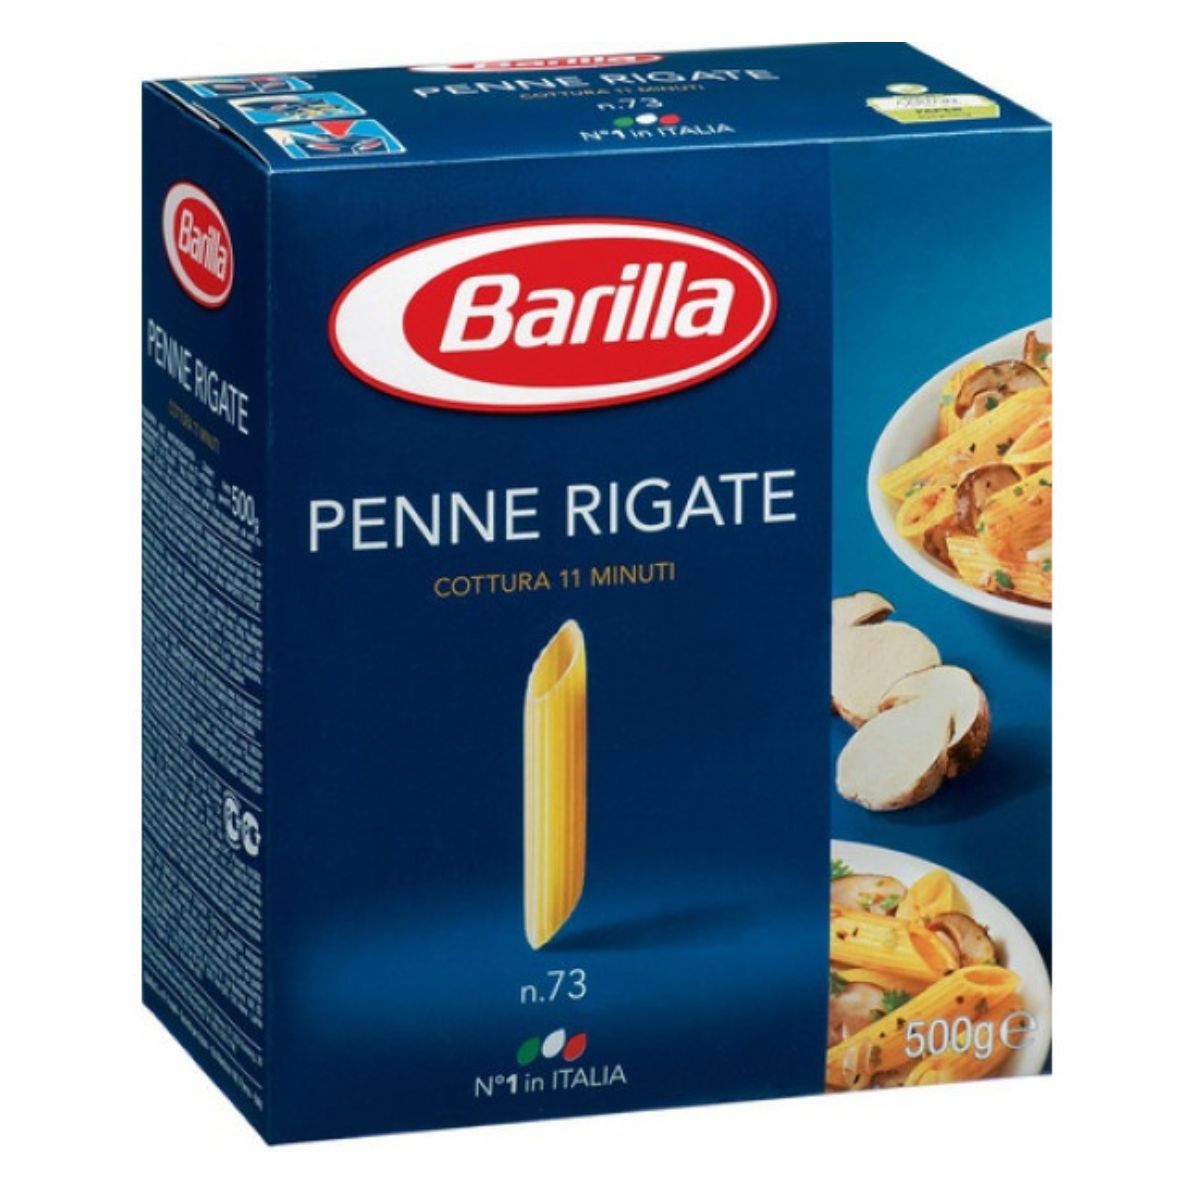 Box of Barilla - Pasta Penne Rigate - 500g, number 73, package.